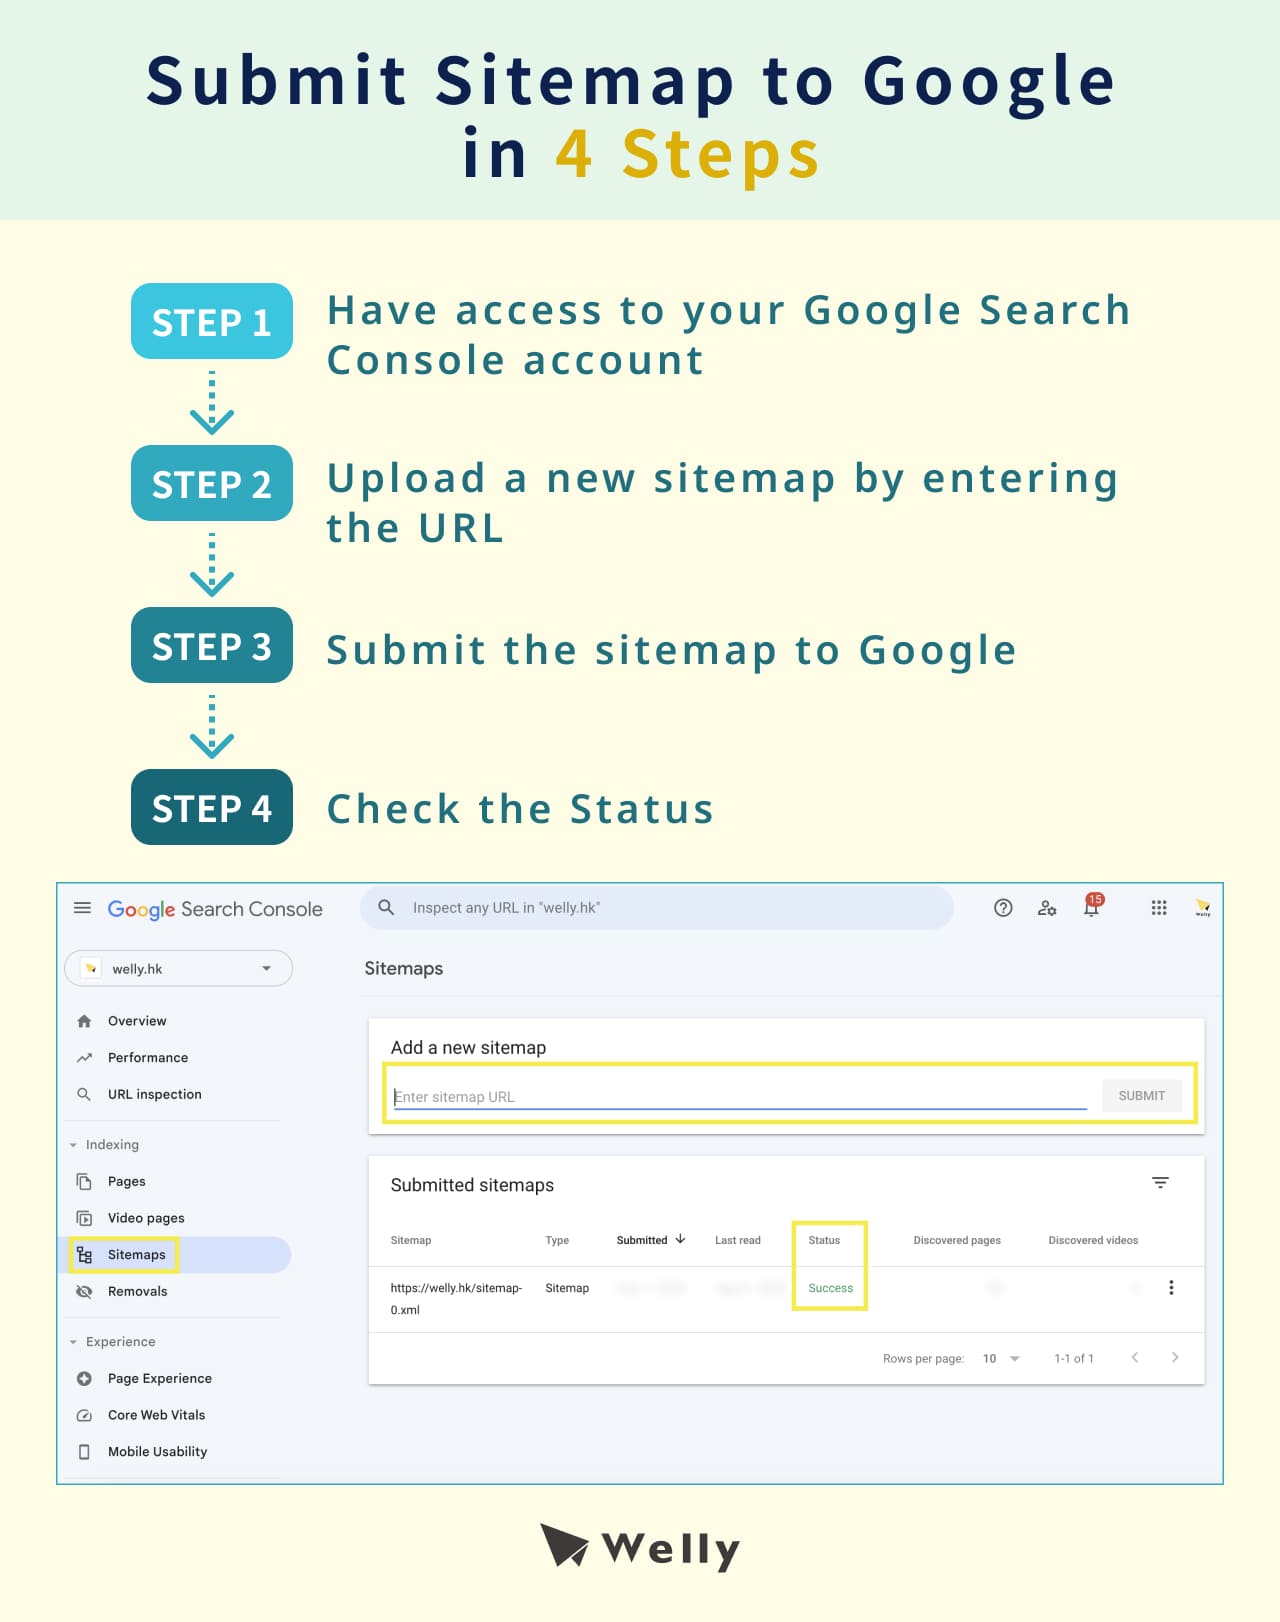 Submit Sitemap to Google in 4 Steps